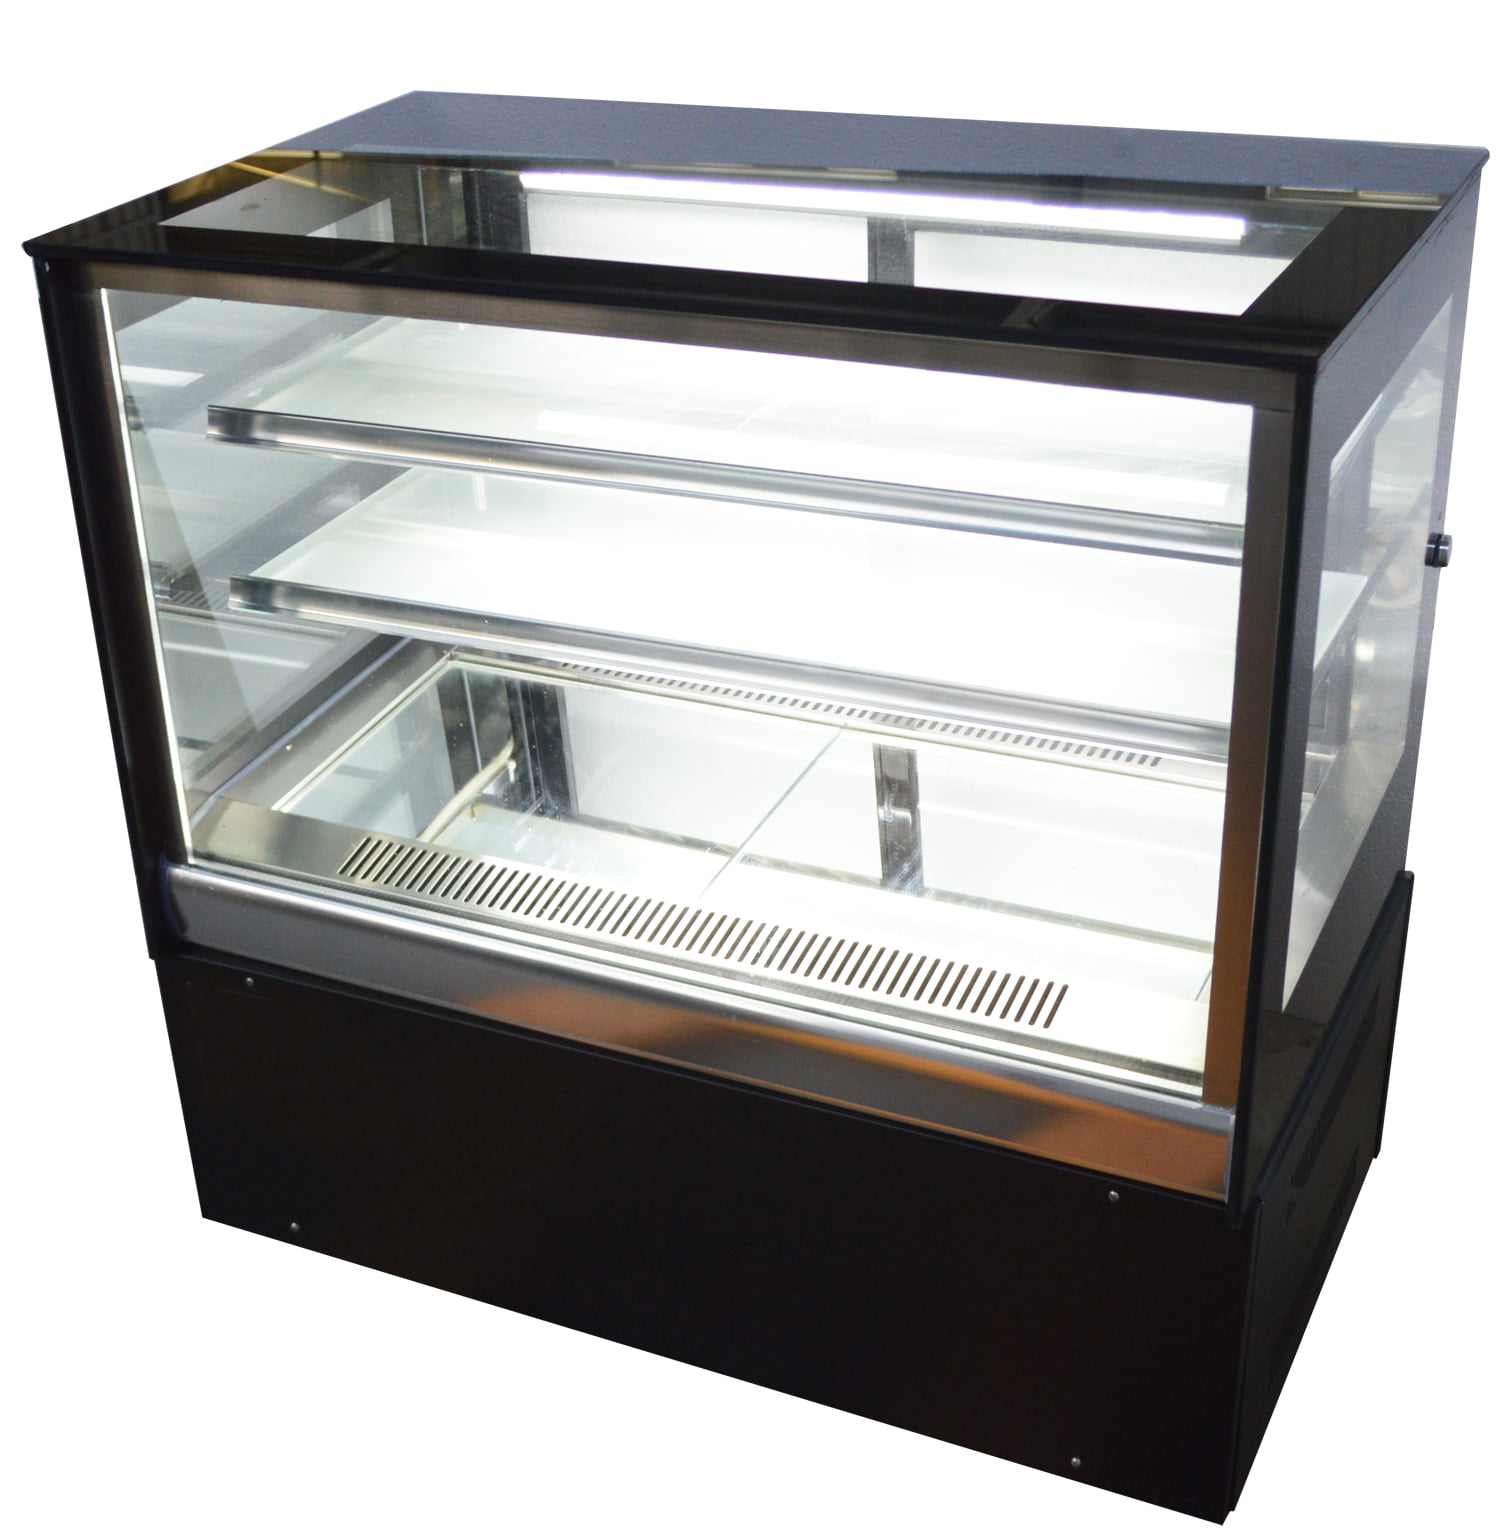 TECHTONGDA Display Refrigerators Cake Showcase Right Angle Cooling Display Case Commercial Bakery Cabinet with LED Light Floor Standing 220V Rear Door 